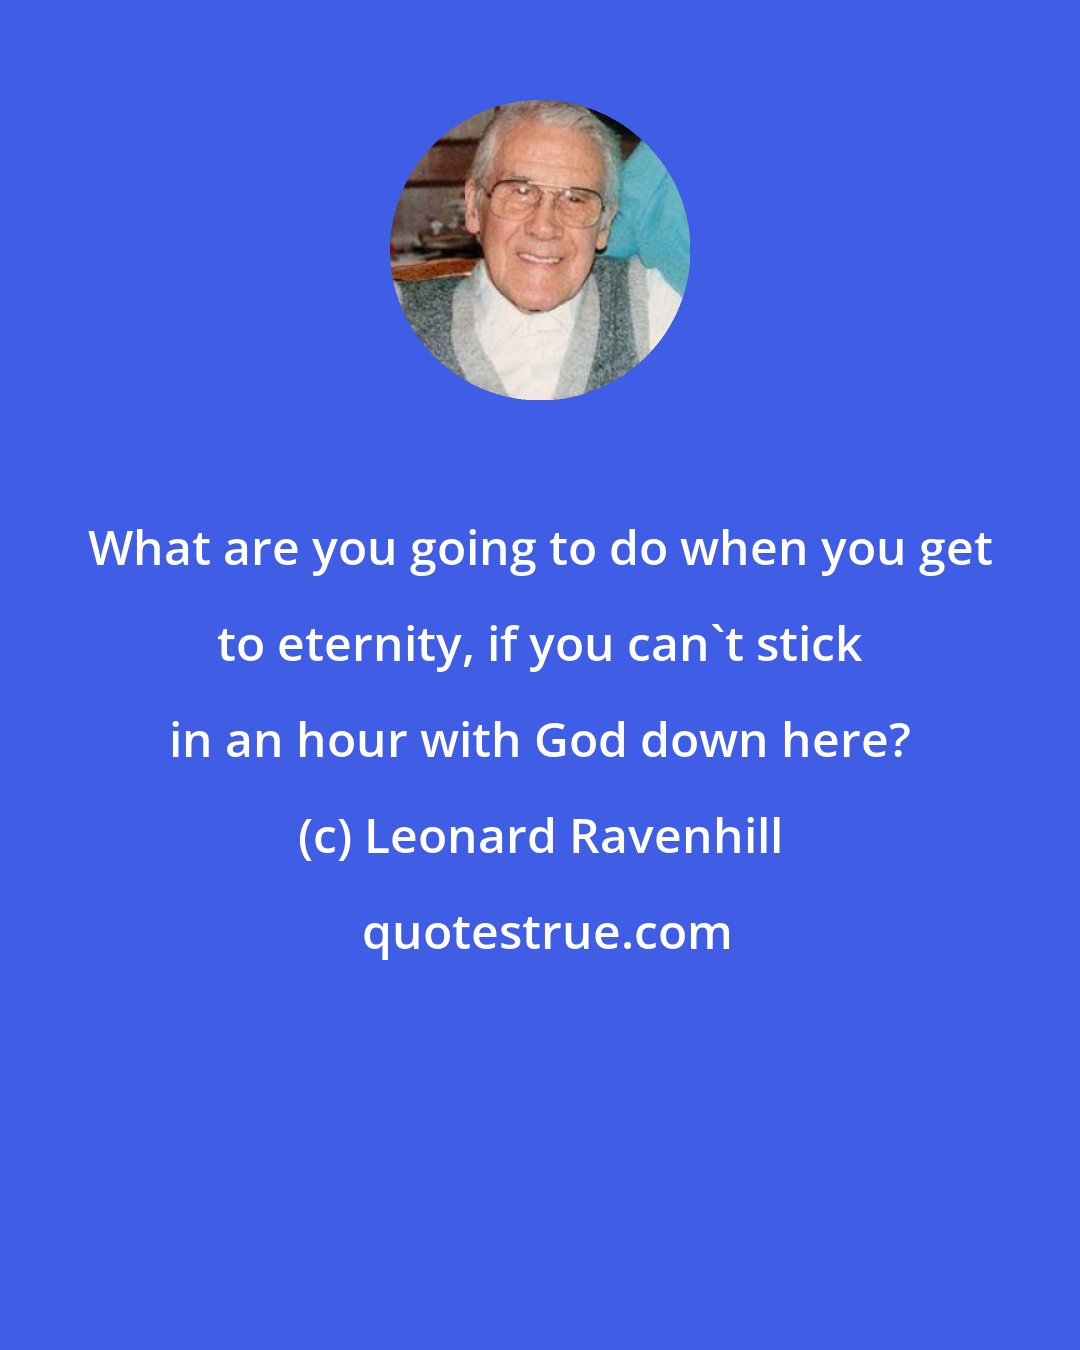 Leonard Ravenhill: What are you going to do when you get to eternity, if you can't stick in an hour with God down here?